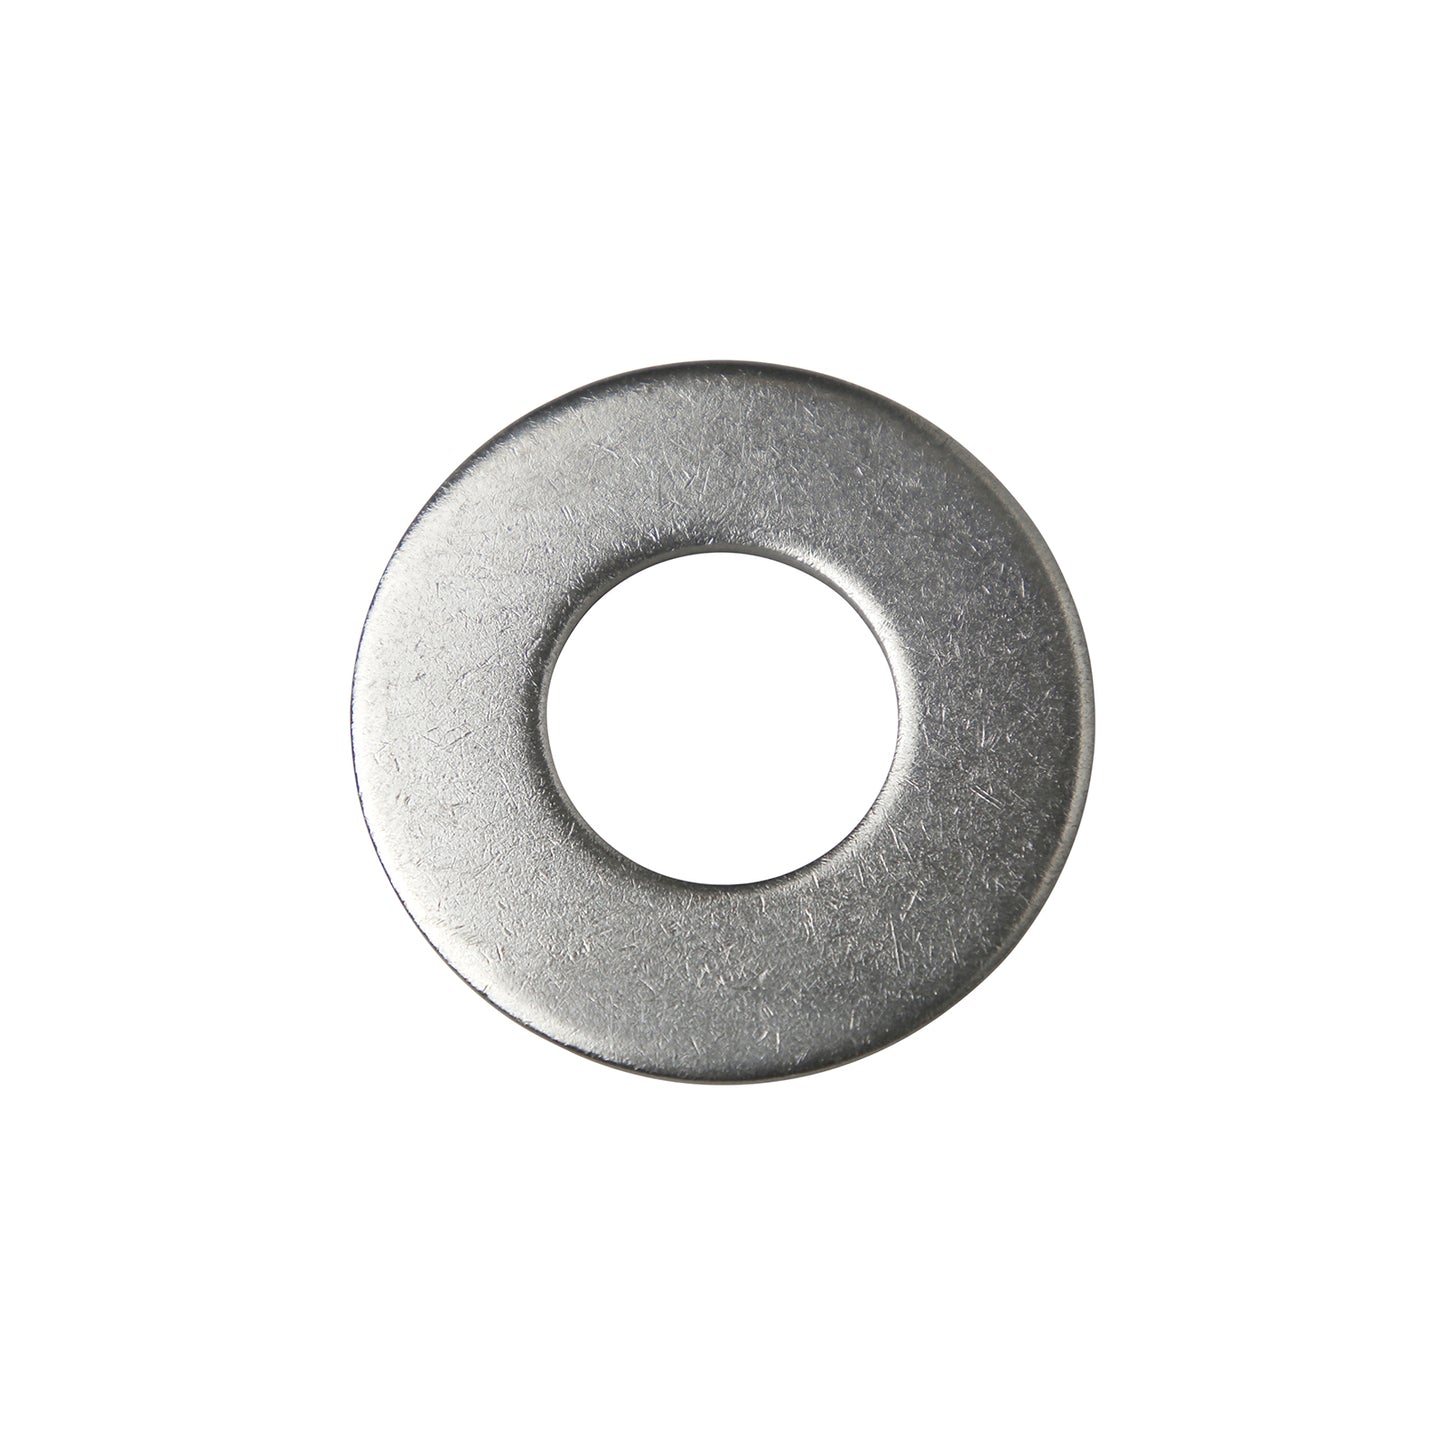 7/8" Conquest USS Flat Washer - 304 Stainless Steel